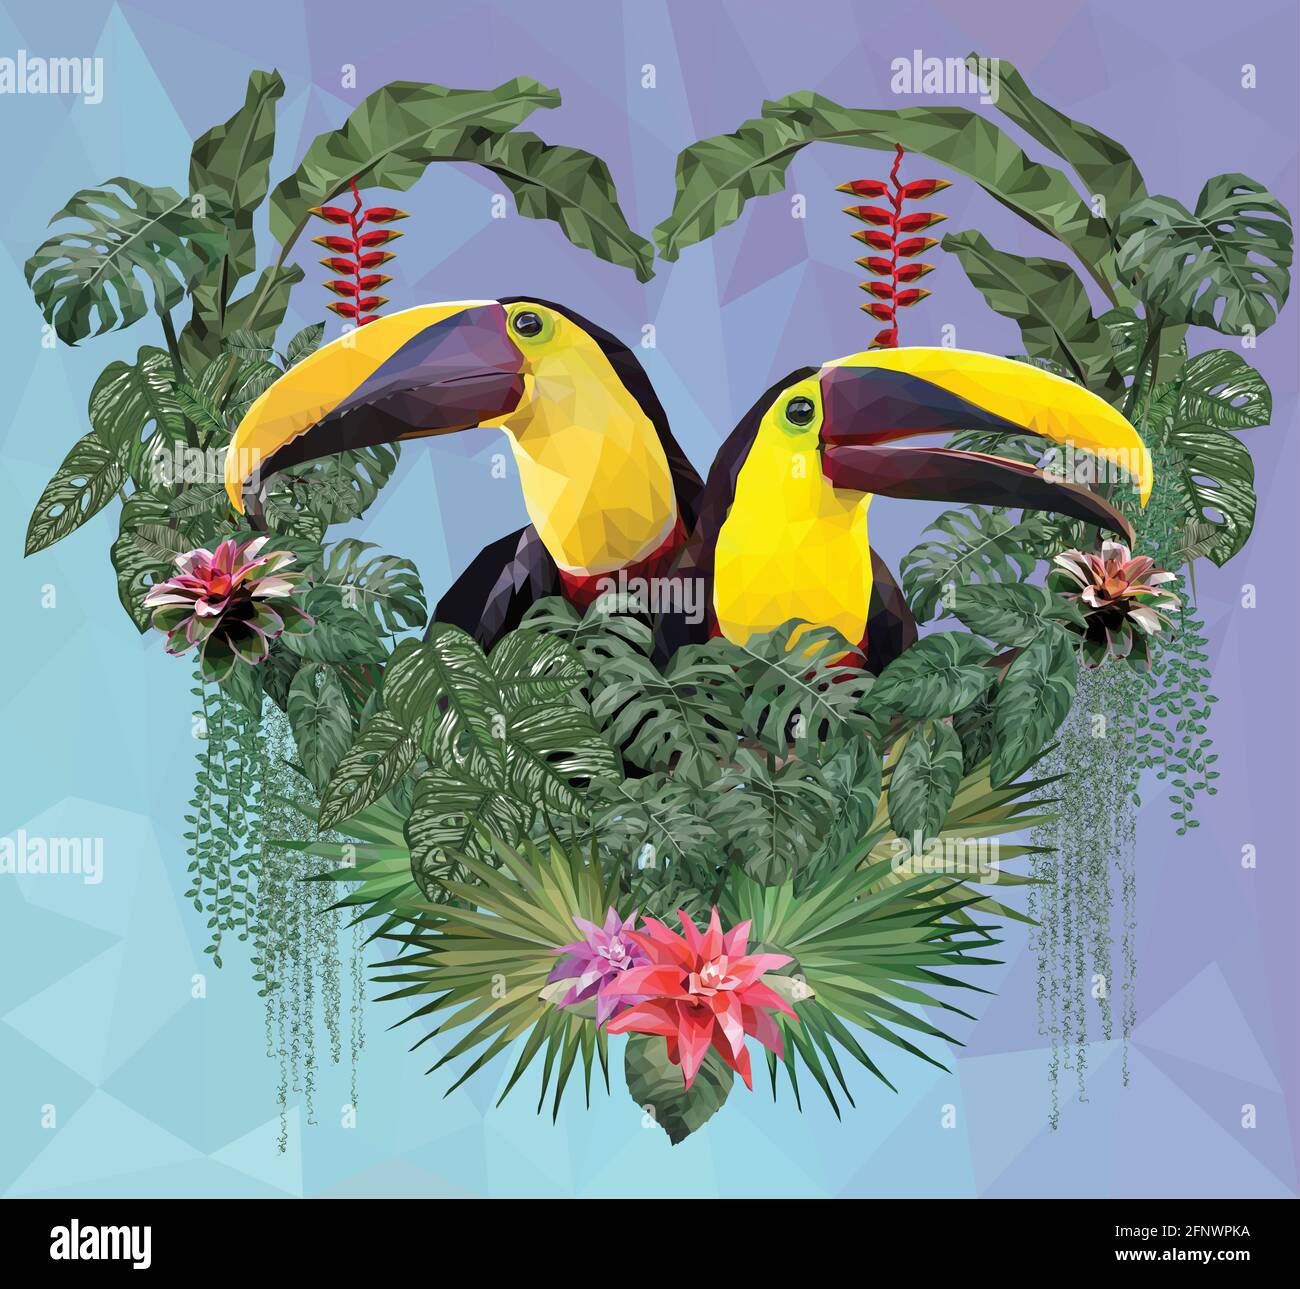 Polygonal Illustration Toucan bird and Amazon forrest plants in love concept. Stock Vector